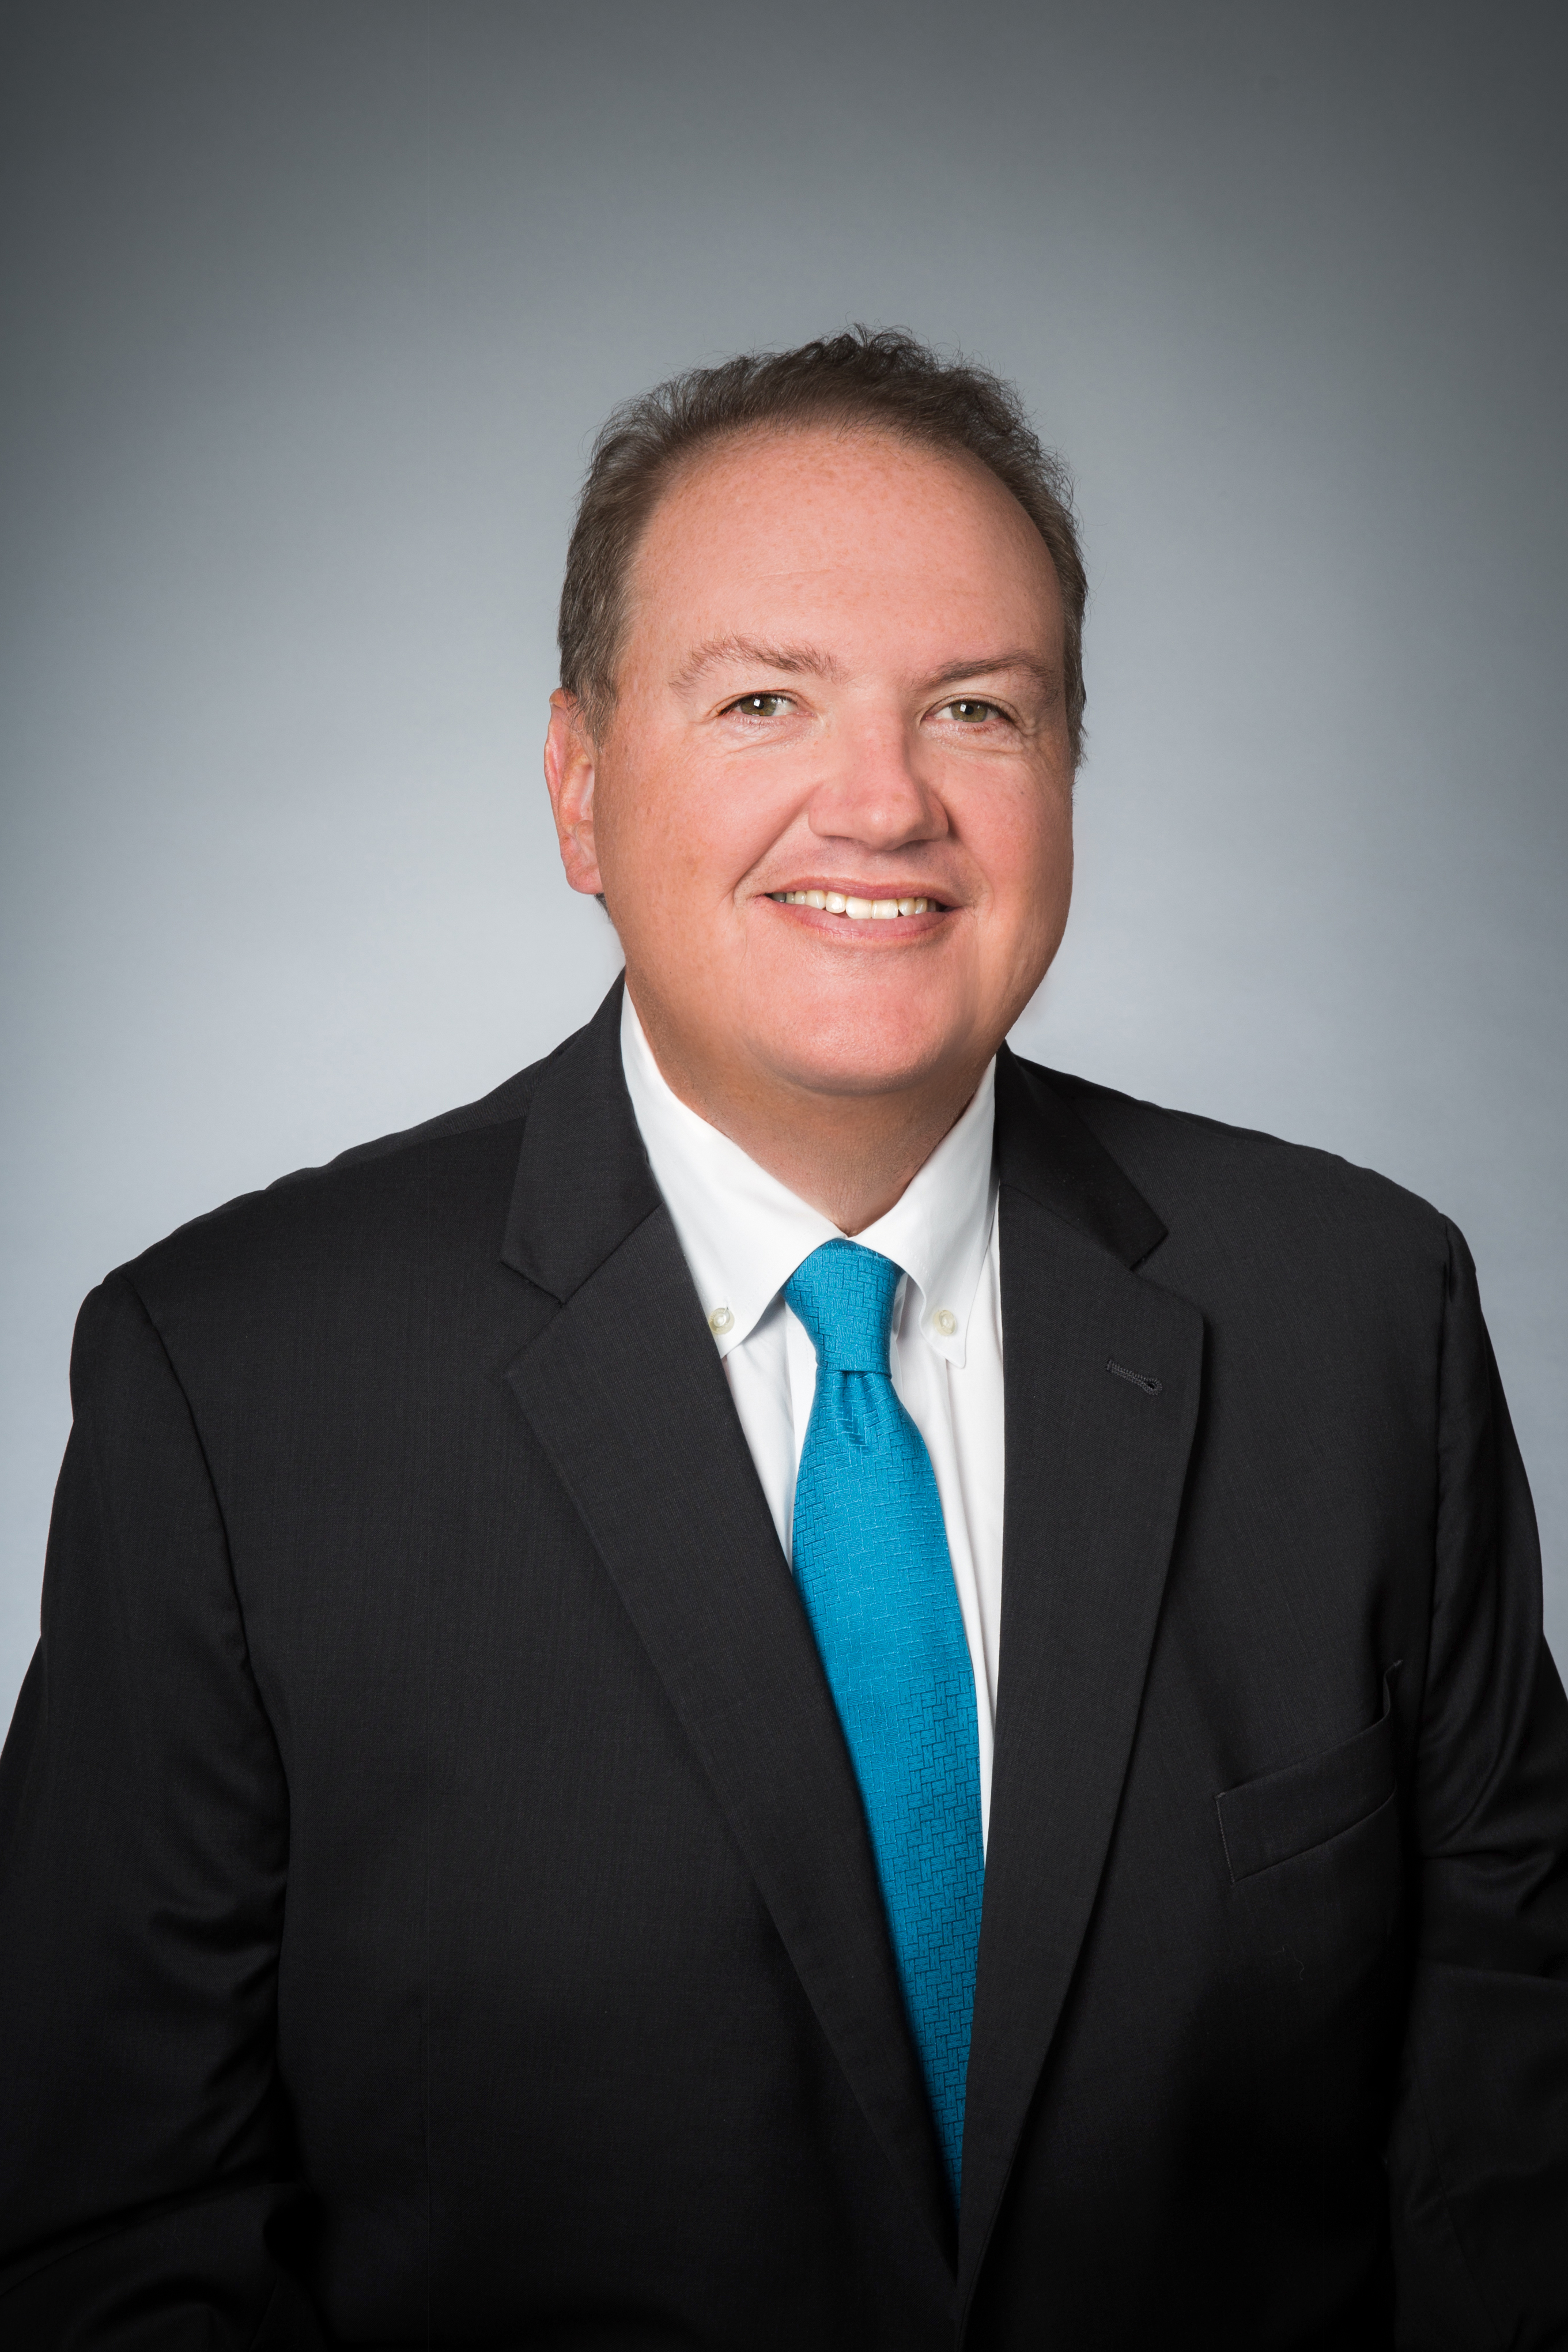 Jeff Burns is Managing Director of Walnut Creek, Calif.-based Walker &amp; Dunlop and President, Commercial of the California Mortgage Bankers Association (CMBA)